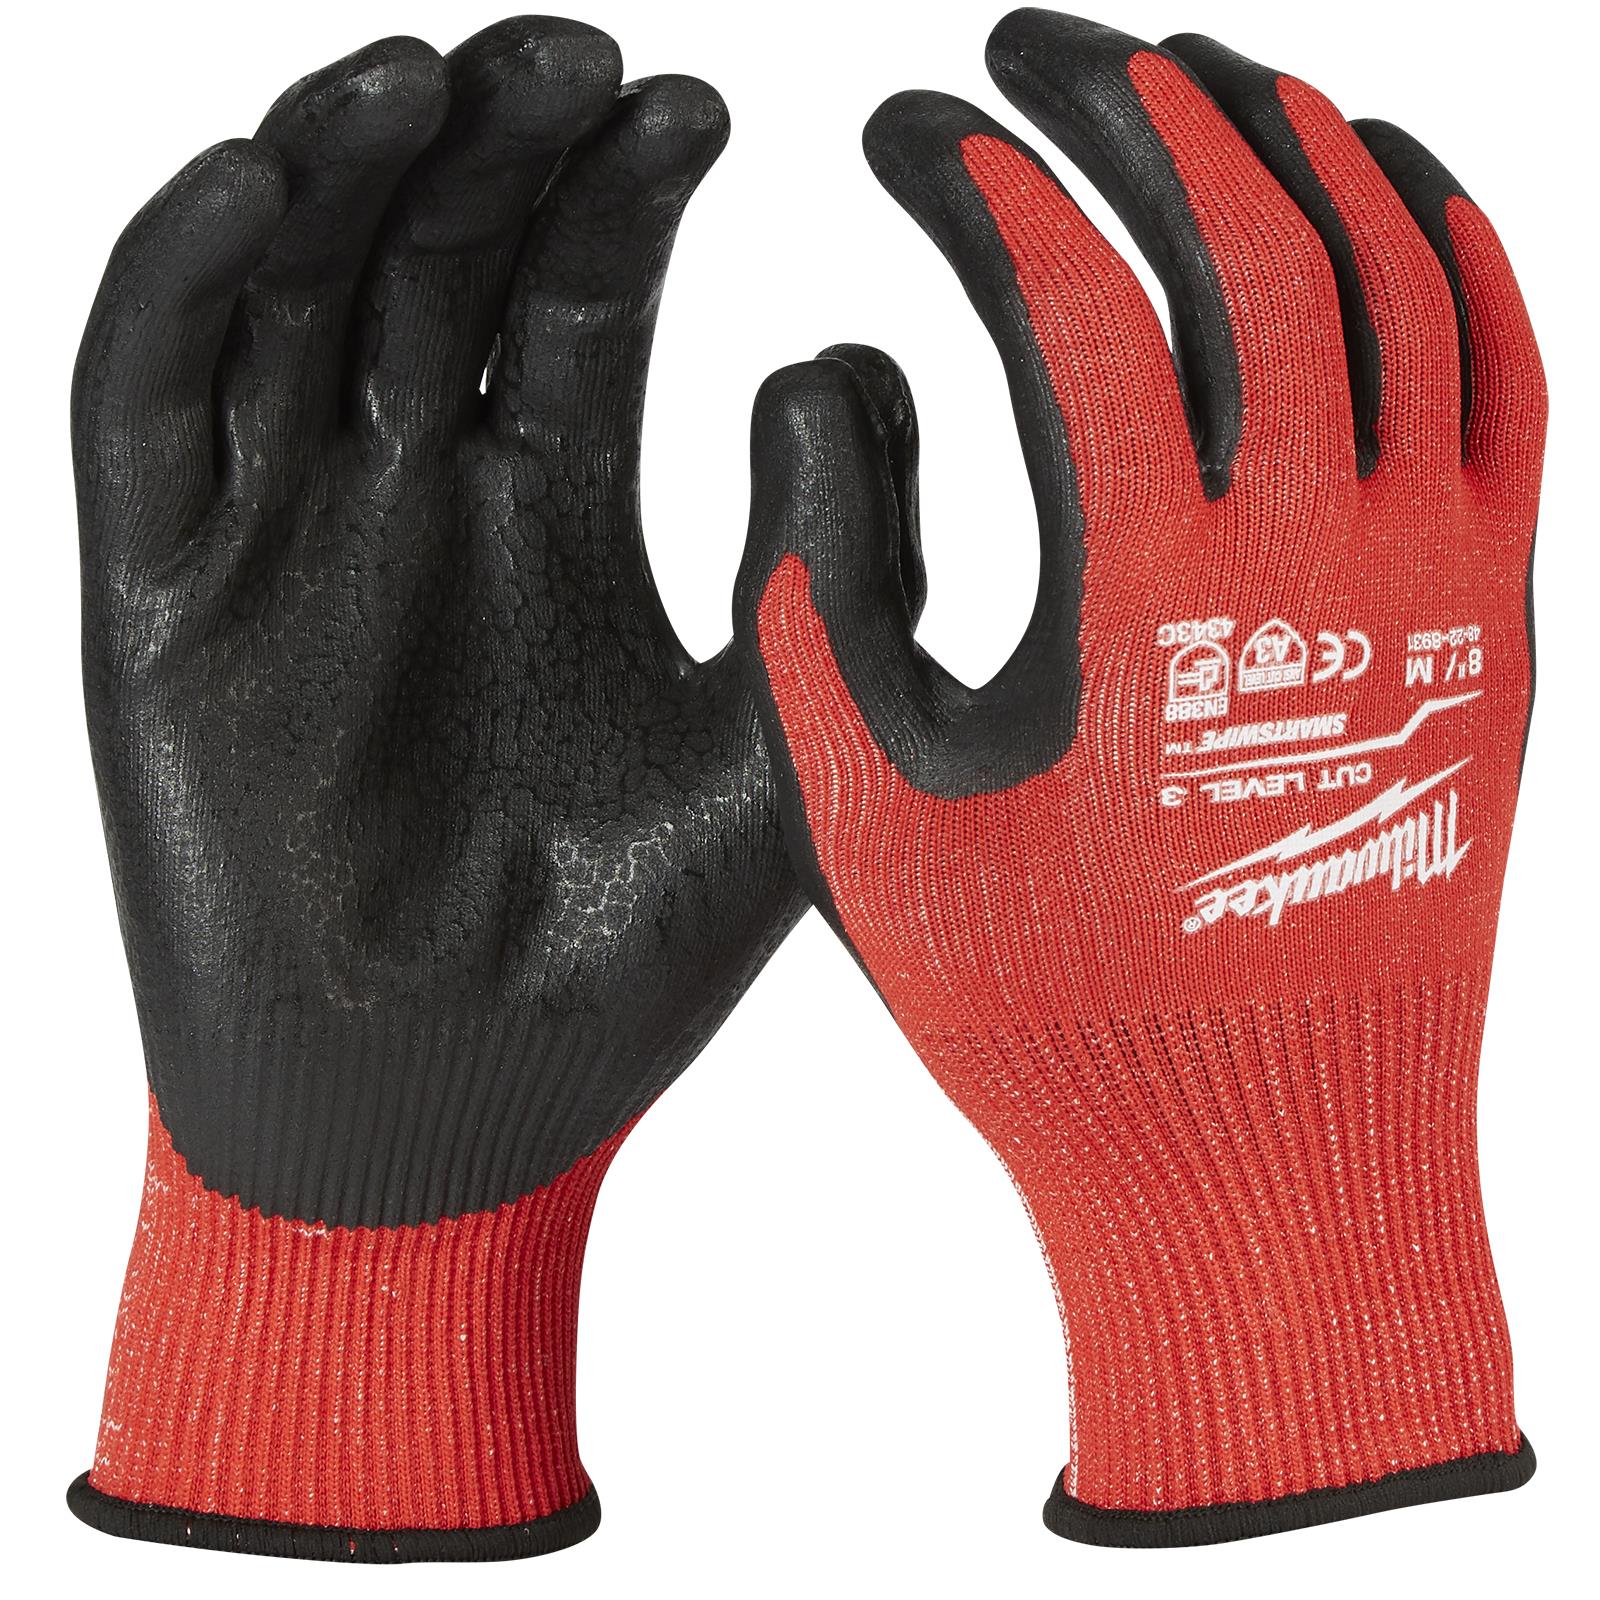 Milwaukee Safety Gloves Cut Level 3/C Dipped Glove Size 9 / L Large